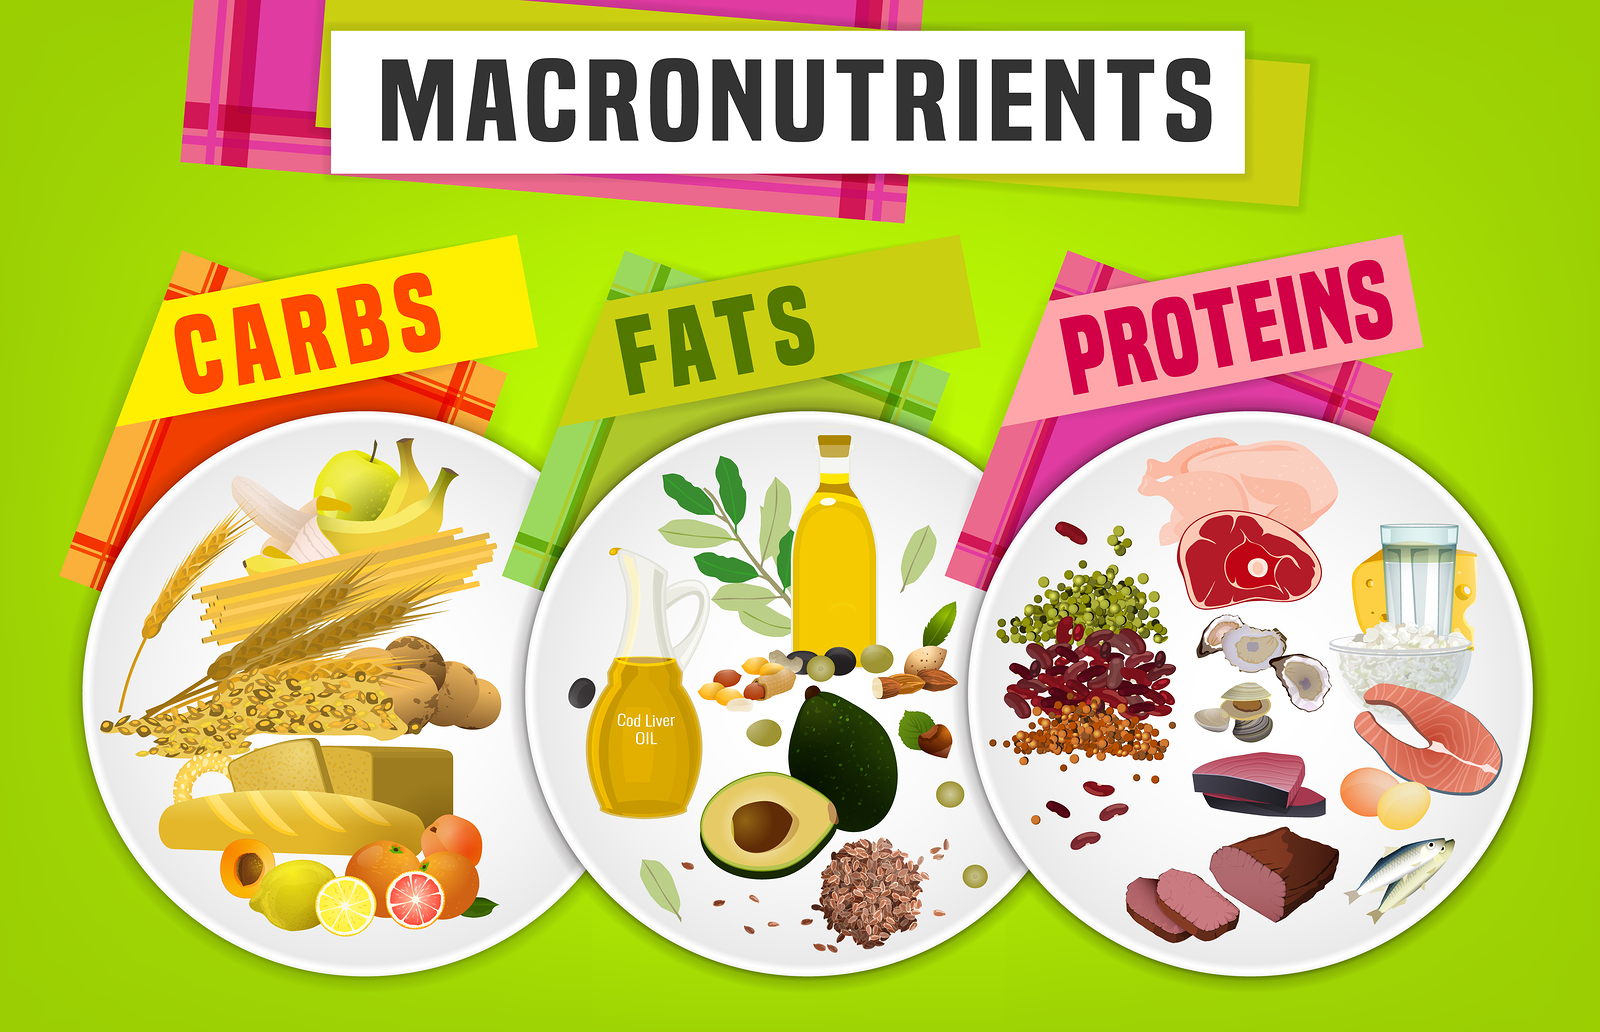 What Is the Importance of Calculating Macronutrients?